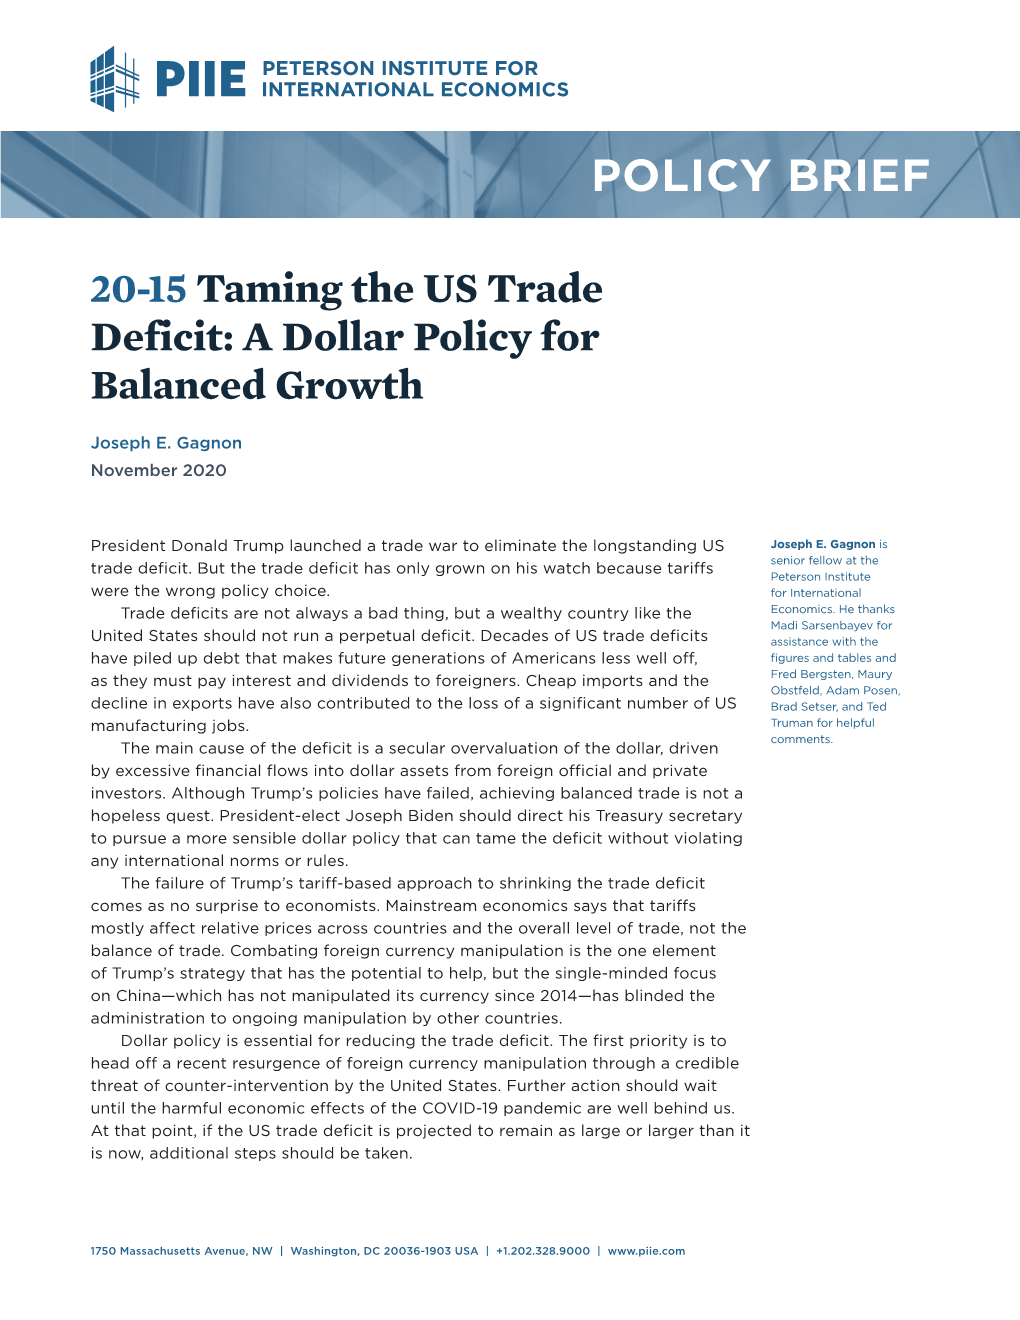 20-15 Taming the US Trade Deficit: a Dollar Policy for Balanced Growth